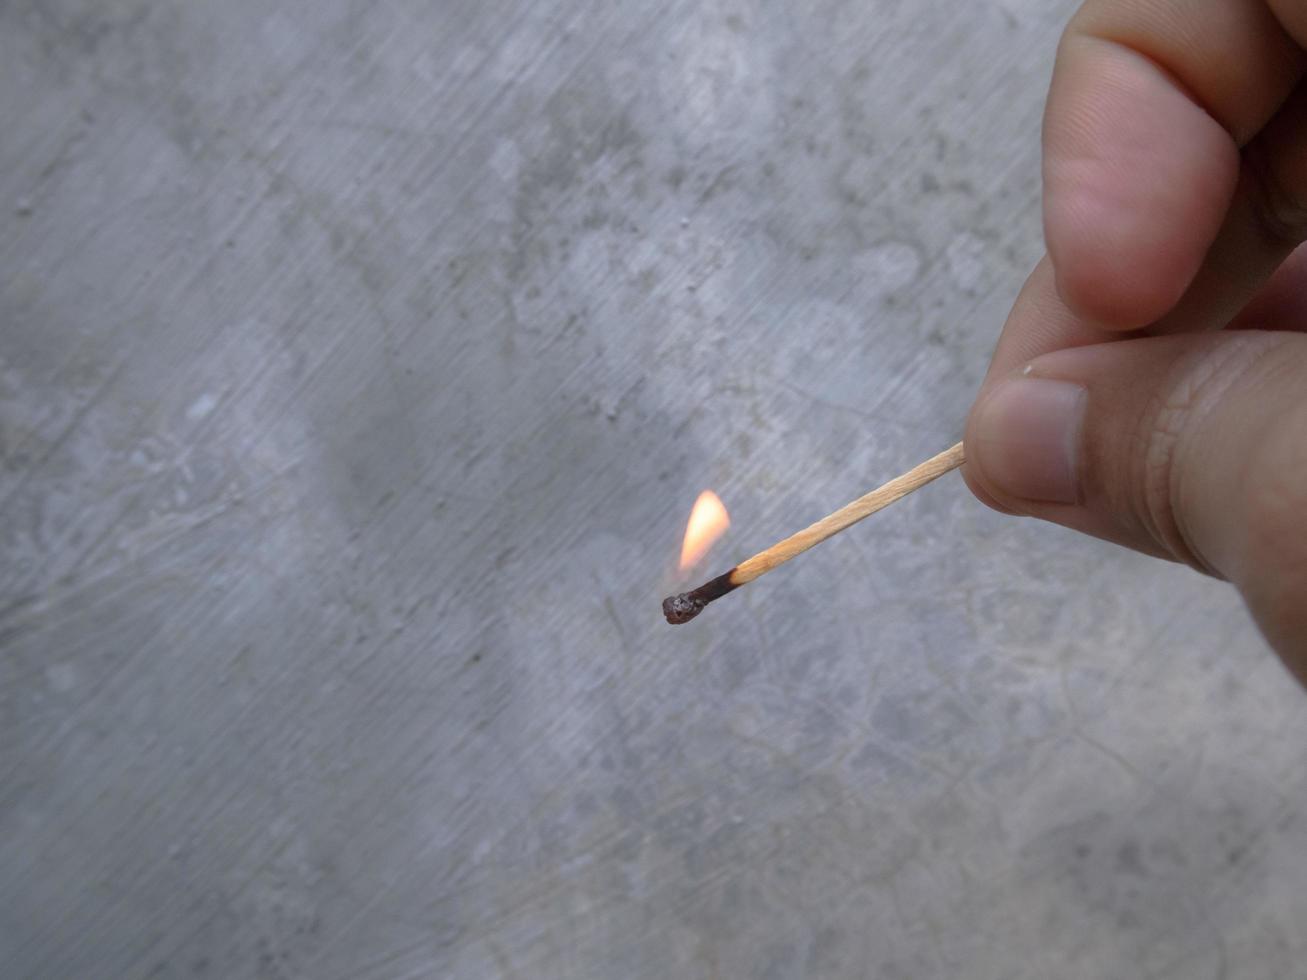 a burning wooden match in a man's hand photo